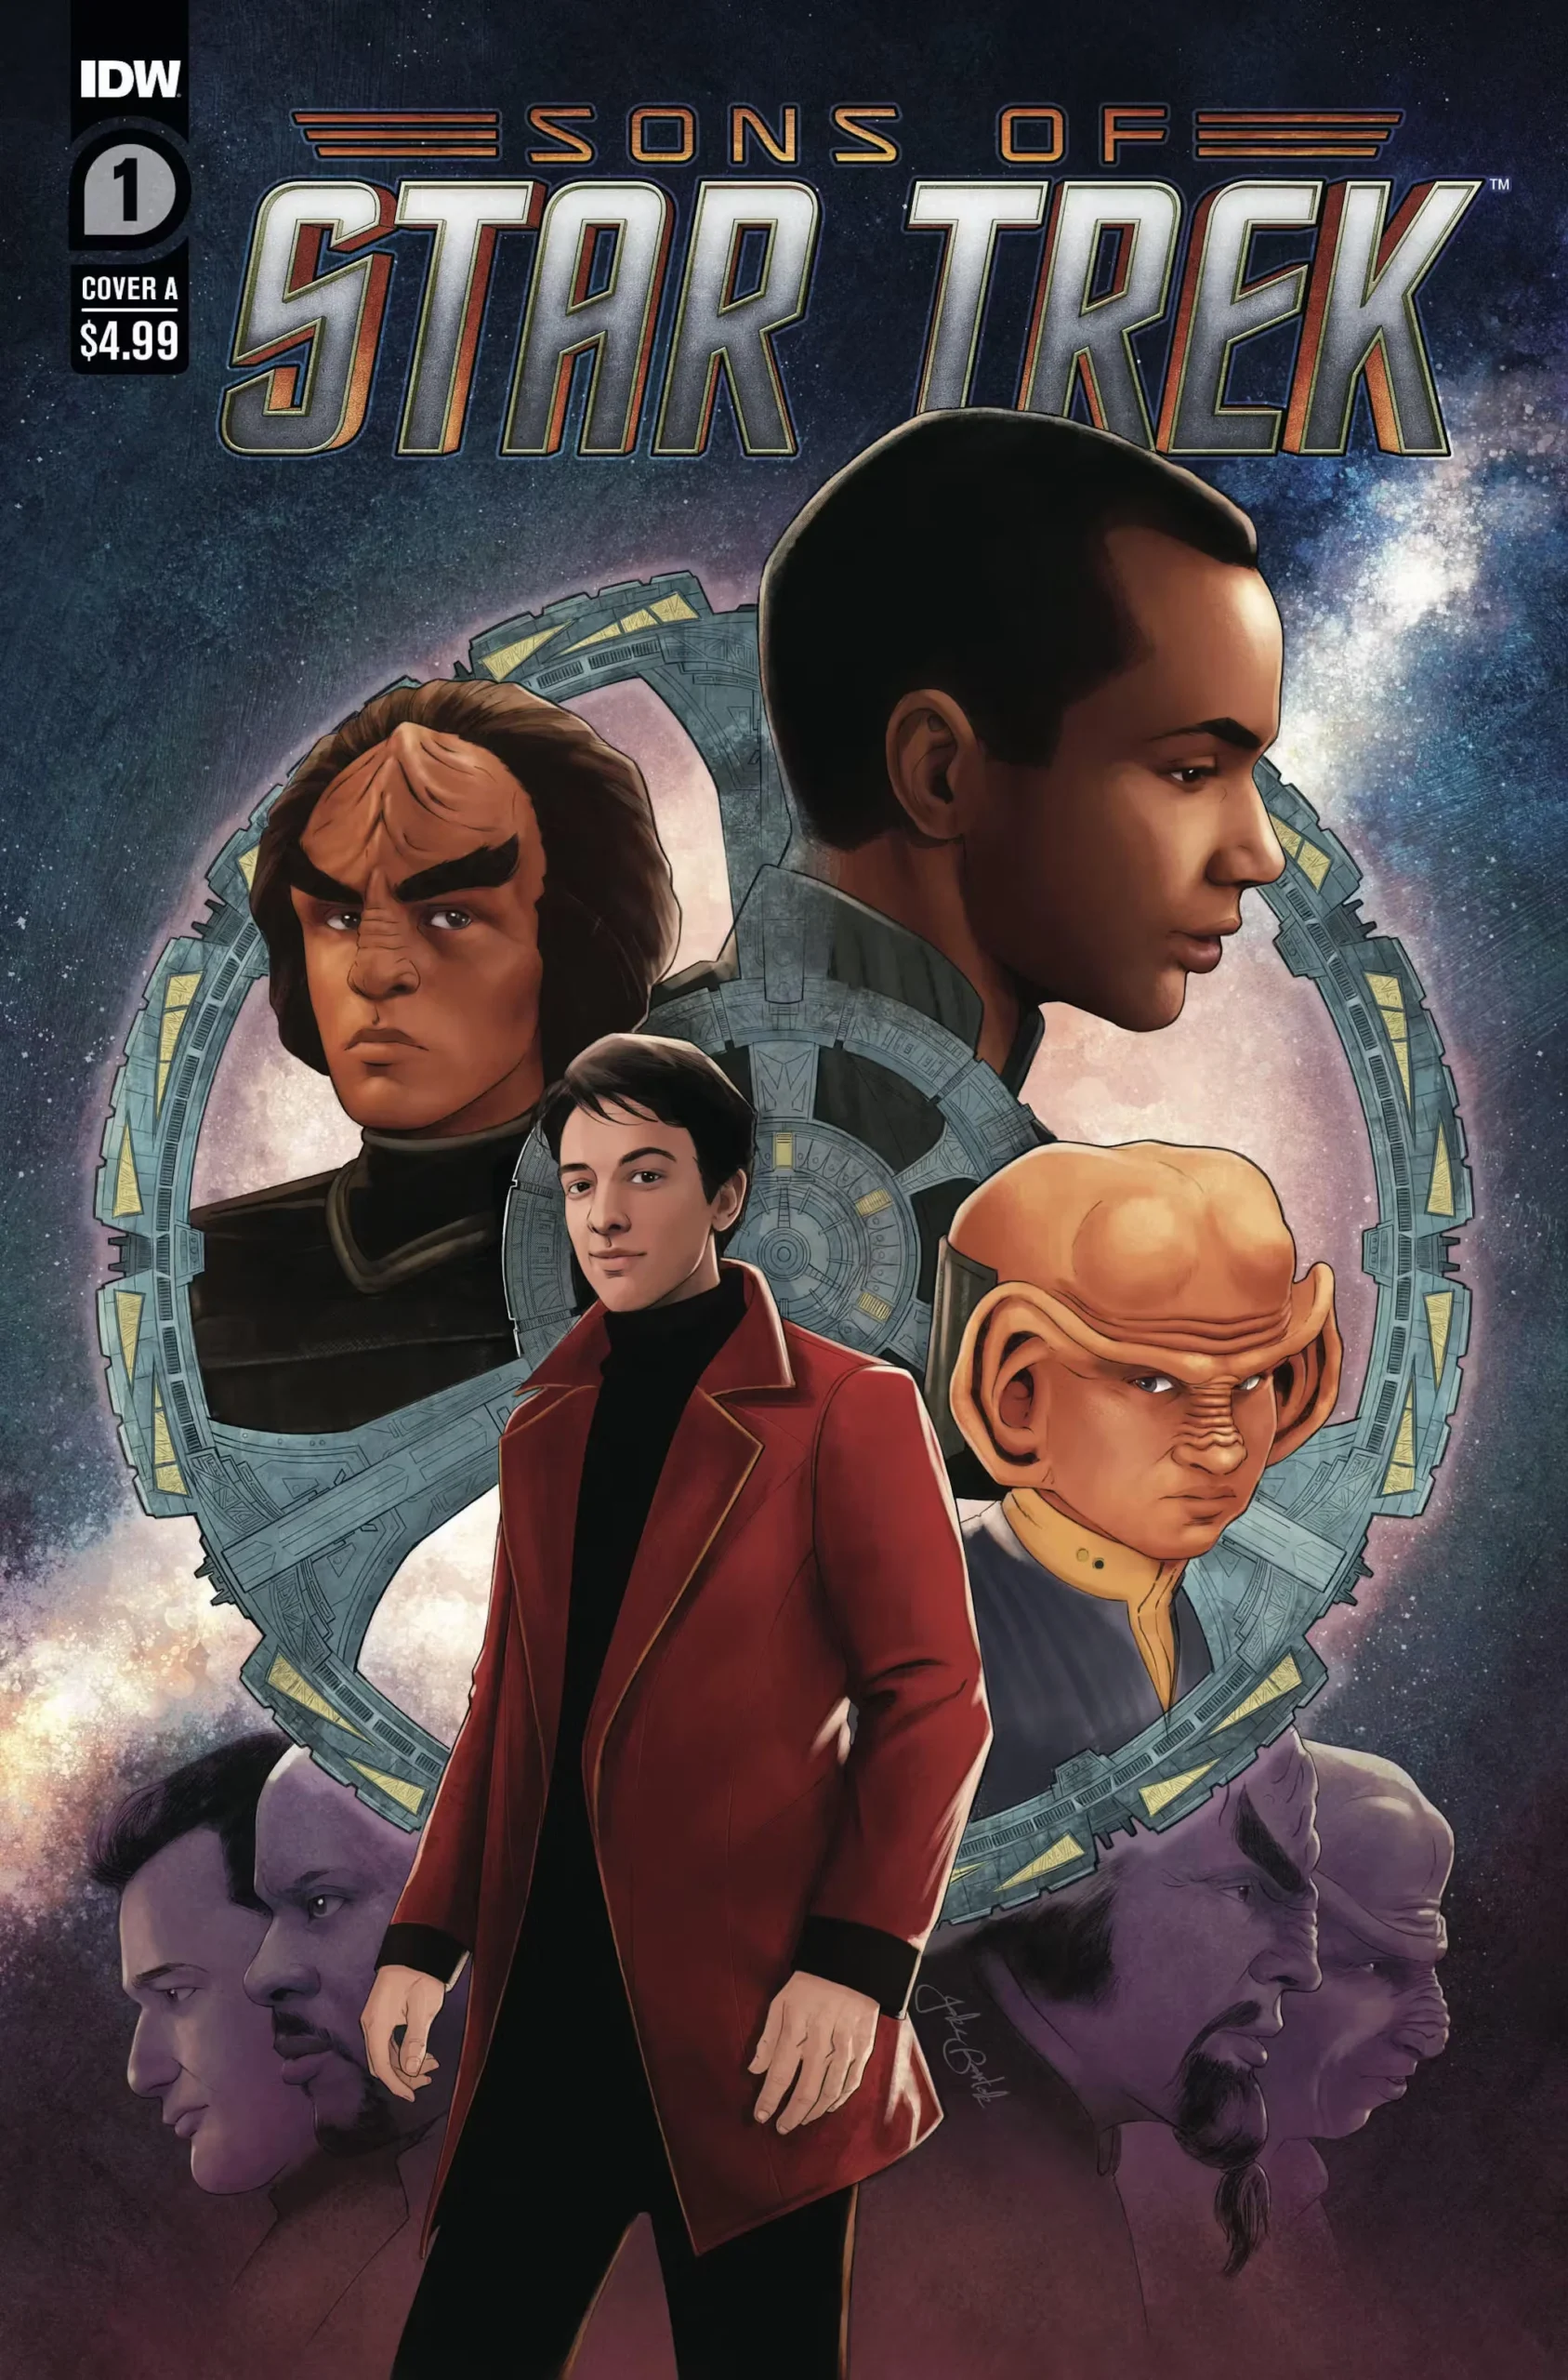 IDW NYCC Panel Reveals First Look At Upcoming Trek Comics